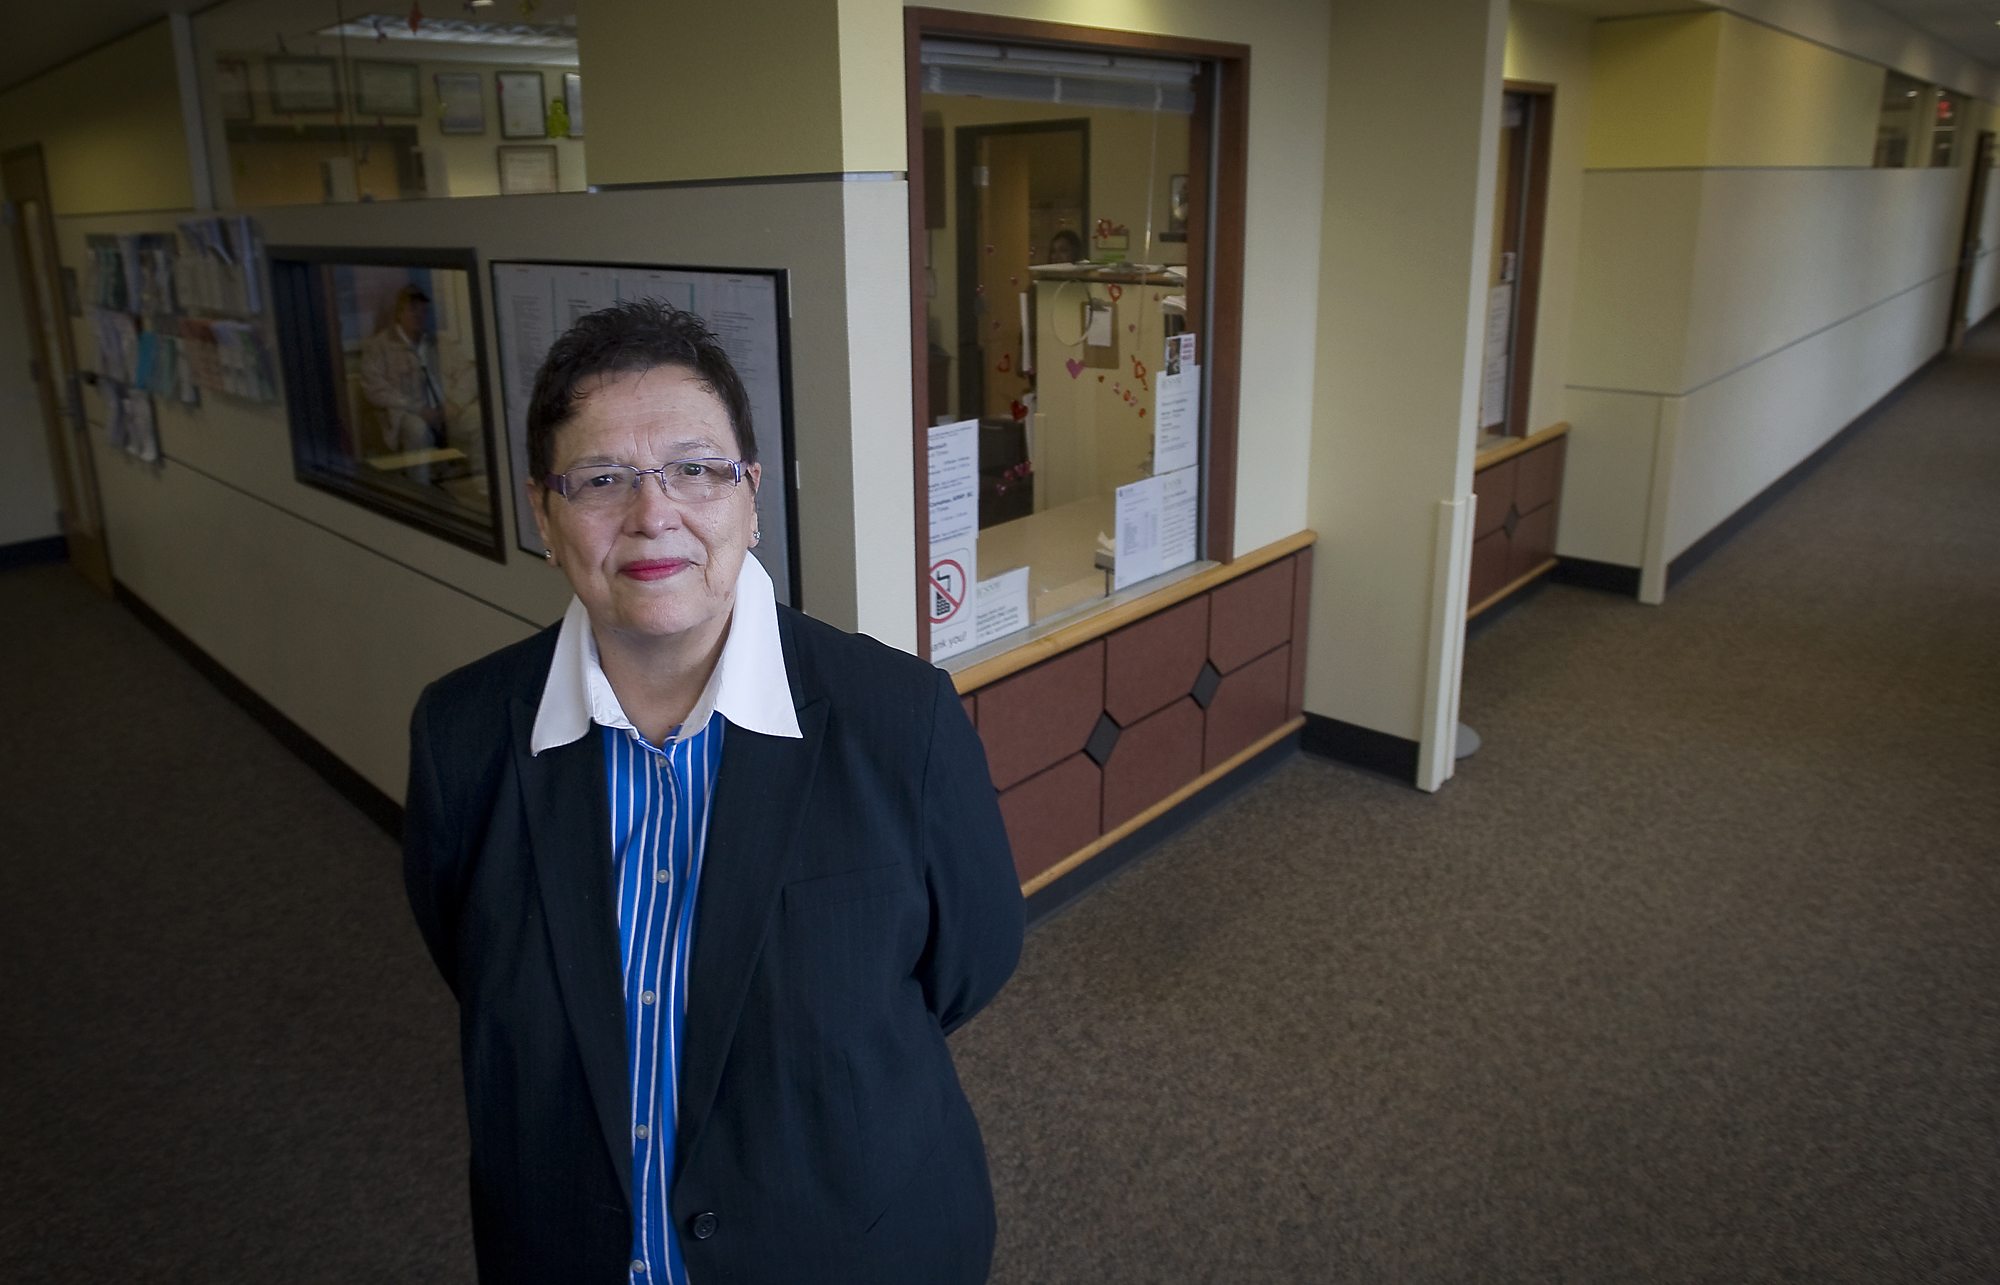 Sharon Krupski, executive director of Community Services Northwest, has long tried to convince the county to lower rent at the Center for Community Health.